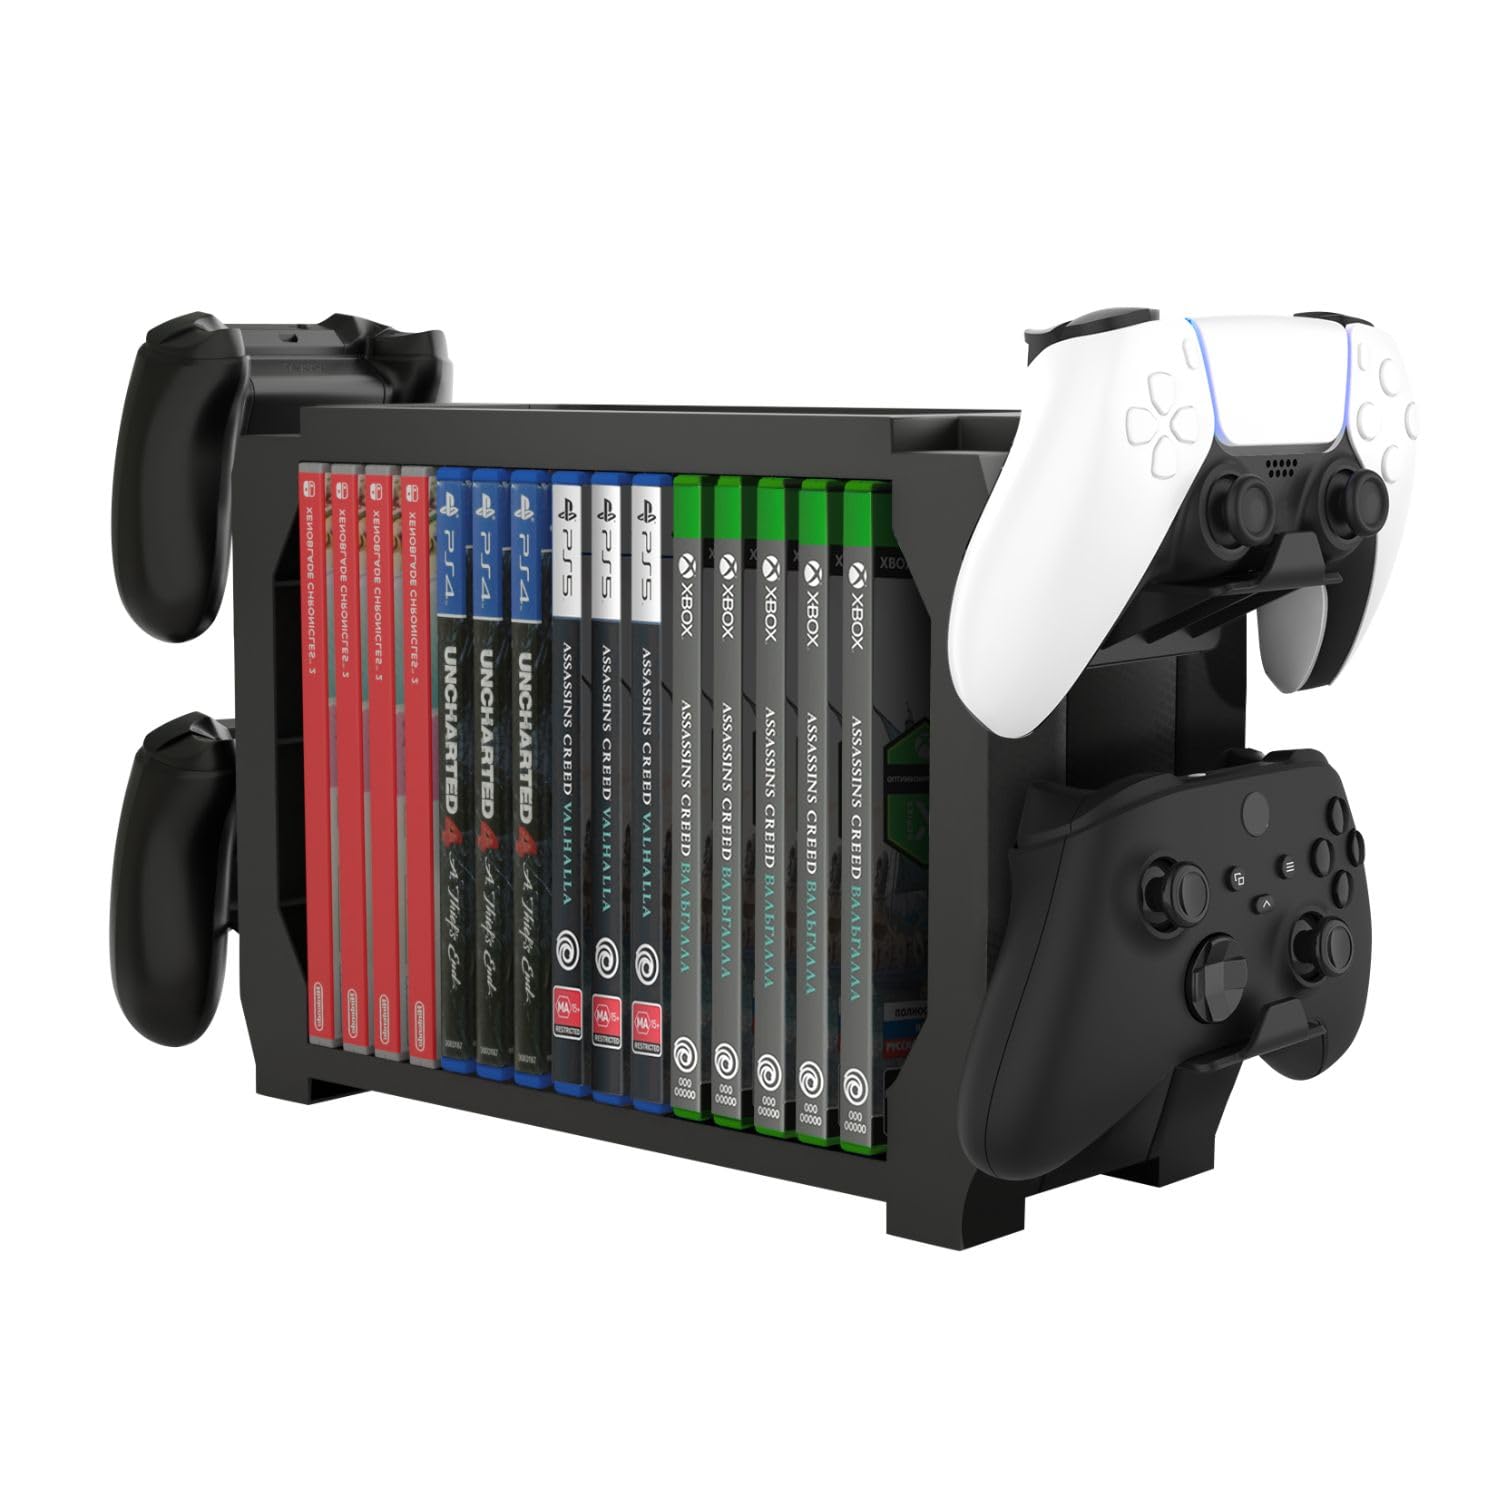 TNP Games Storage Tower (Up to 15 CD Disc) for PS5 Game Disk Rack and Controller Stand Holder for Xbox Series X/Nintendo Switch/PS4 Controller Stand Holder Can hold up to 4 Controller